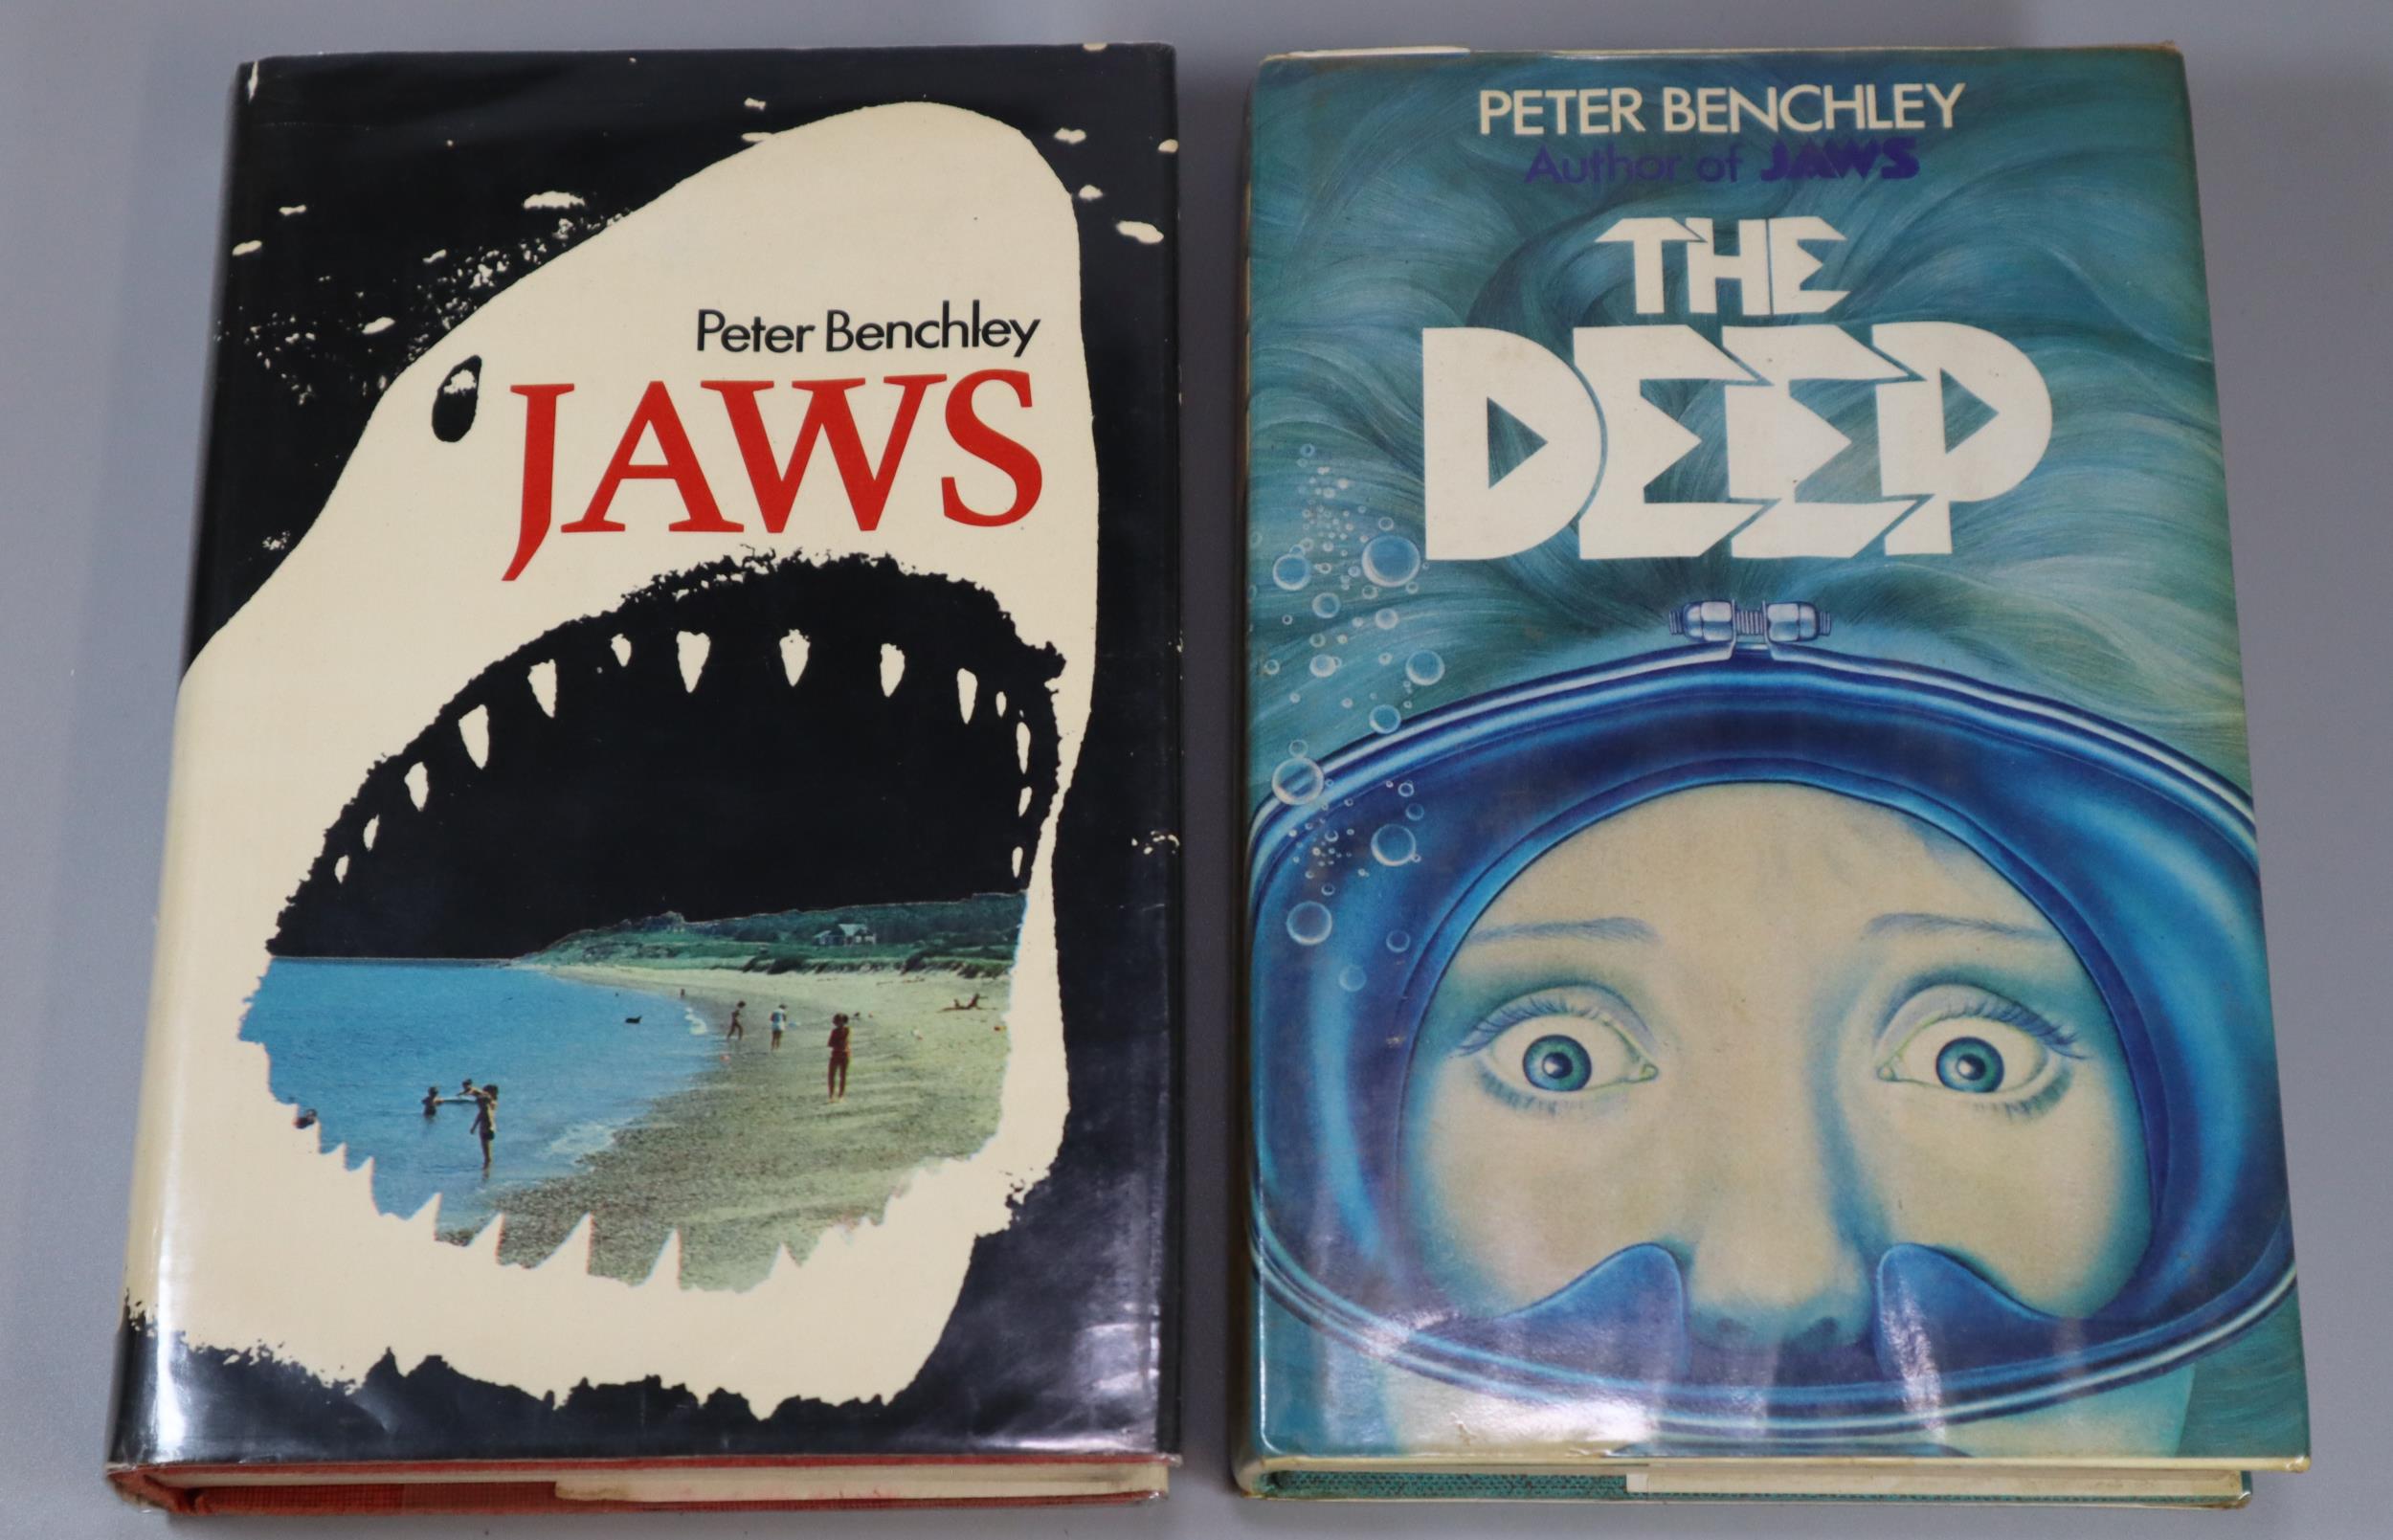 Benchley, Peter; 'Jaws' and 'The Deep', first editions, published by Andre Deutsch, 1974 & 1976.